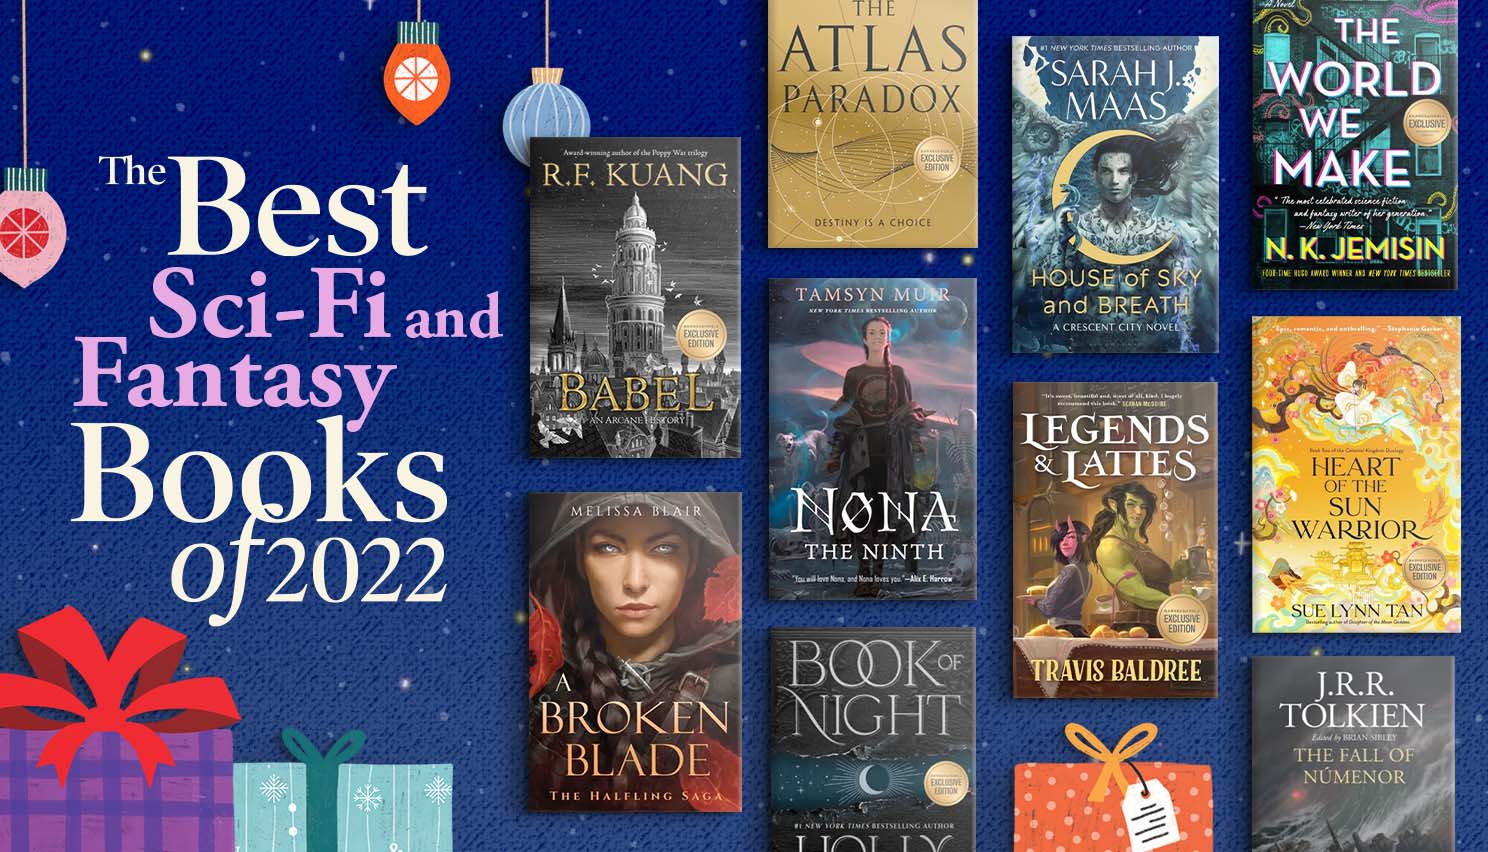 The Best Science Fiction & Fantasy Books of 2022